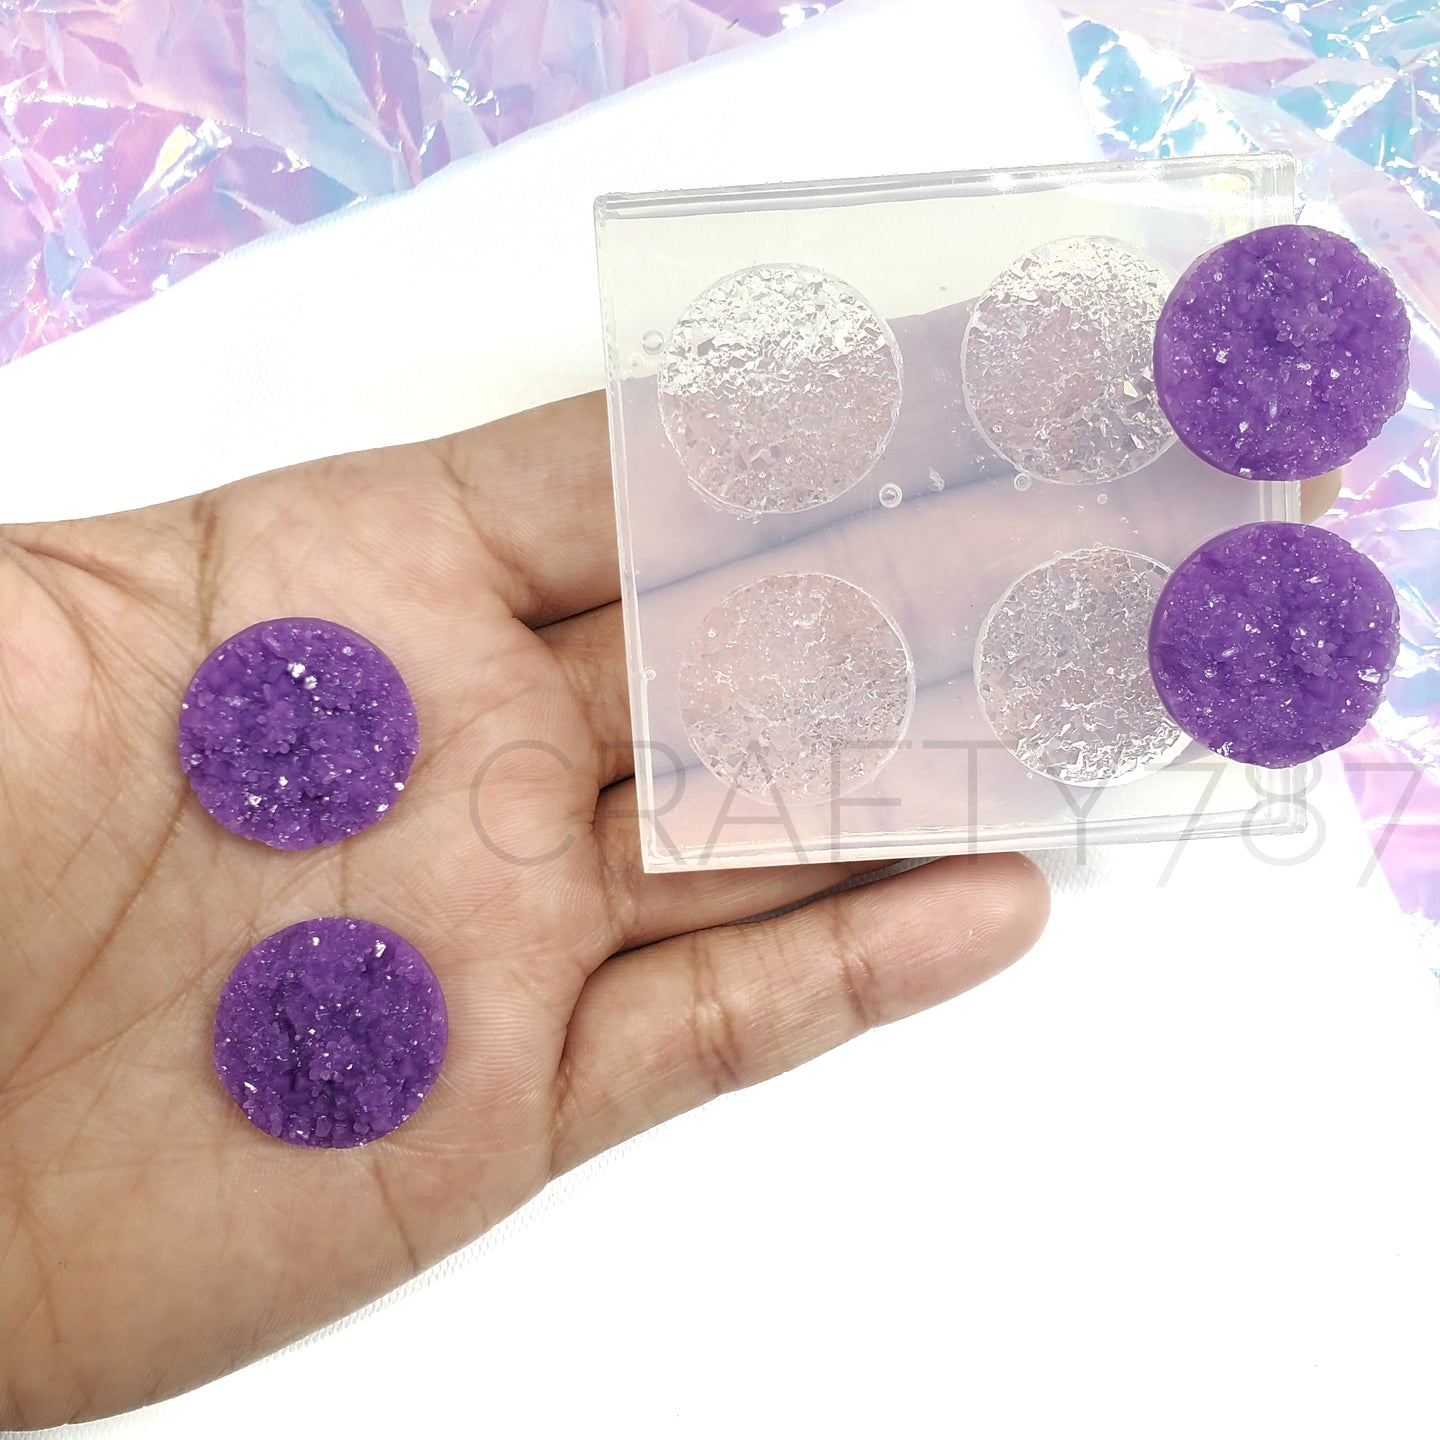 Circle Druzy 25mm Silicone Mold with Bonus 8mm Druzys two Pairs(B5